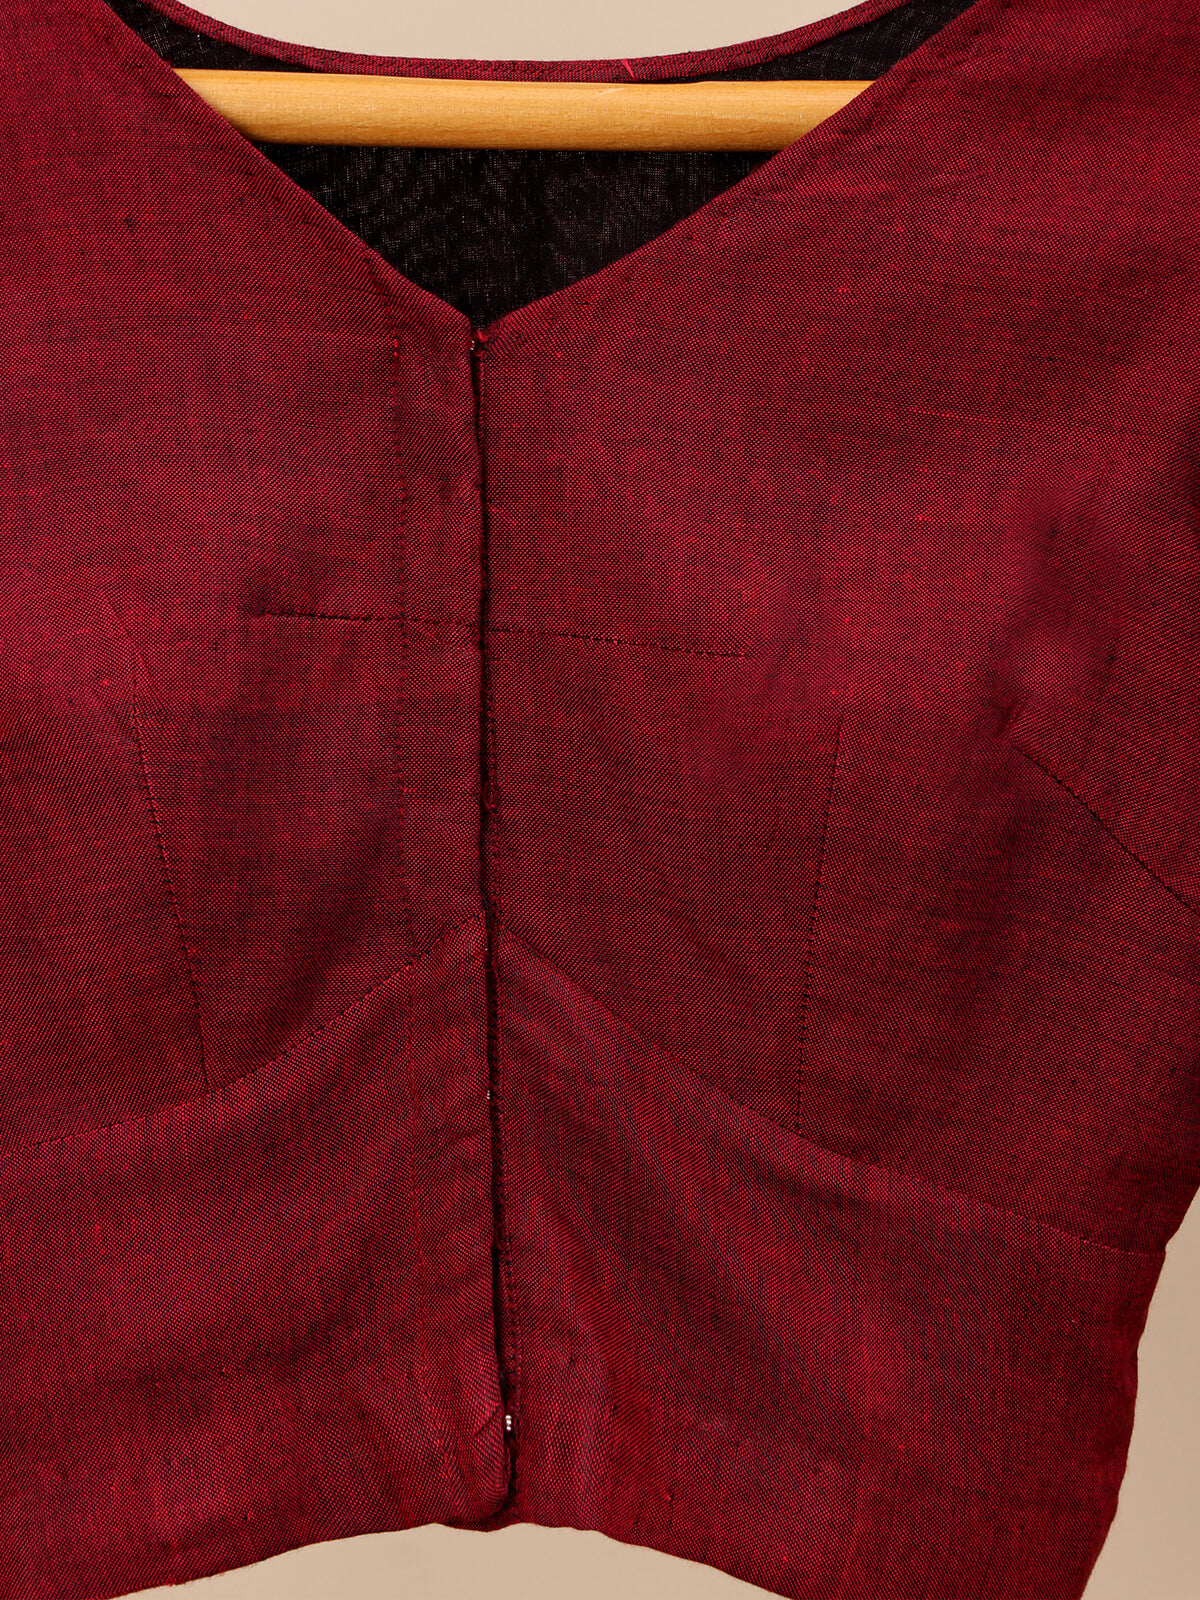 Blouse Stitched – Maroon